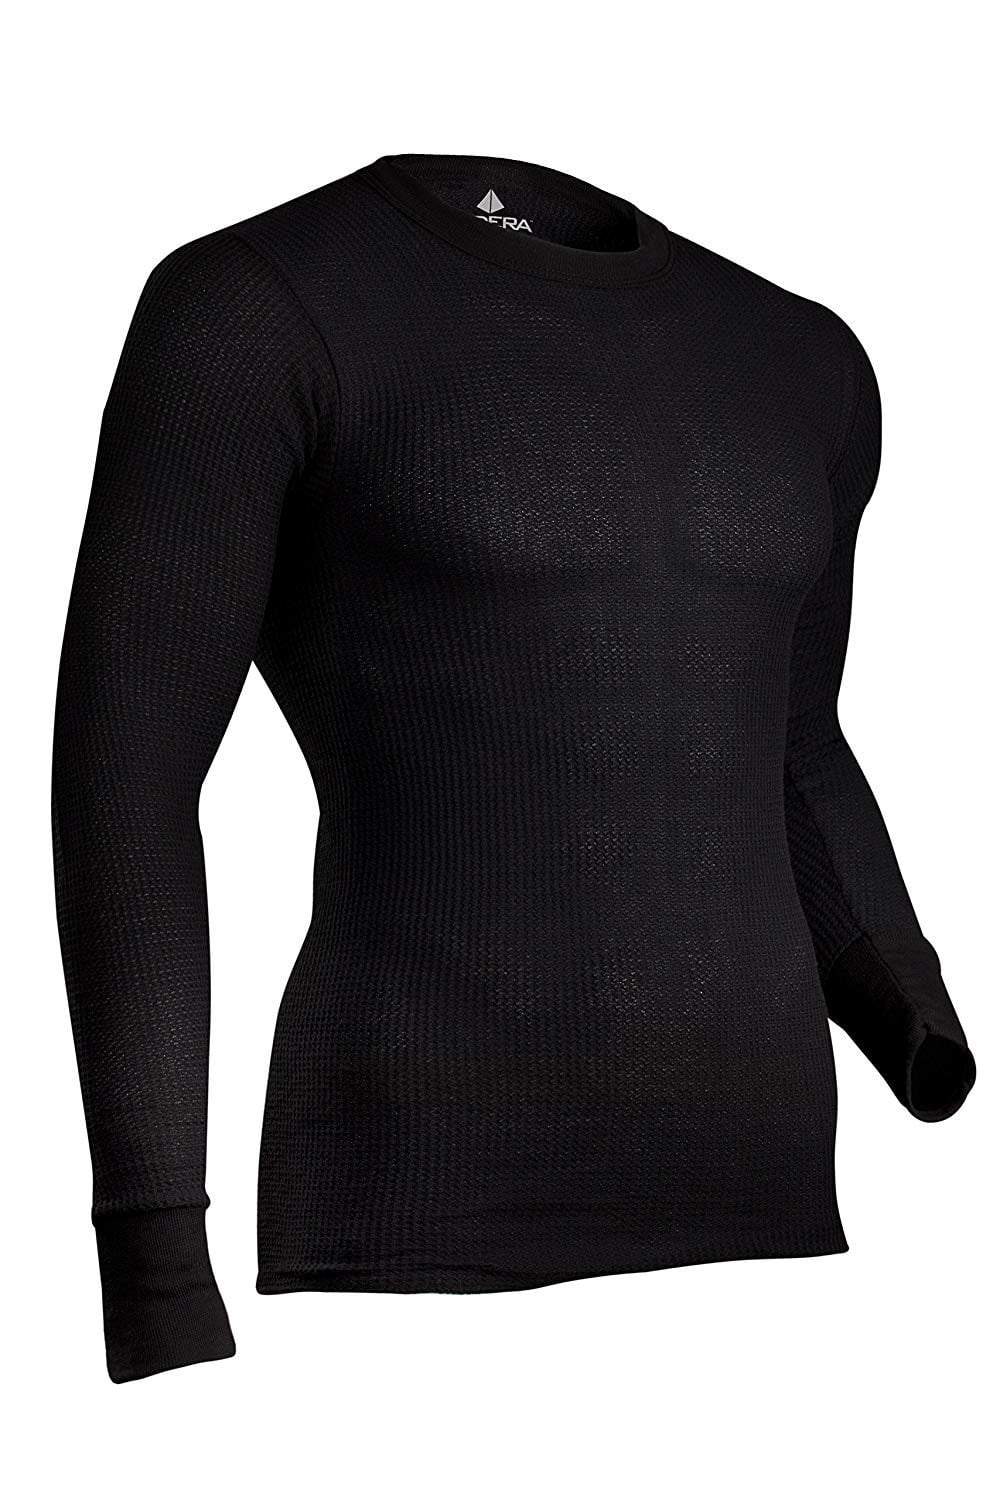 Indera Mens Traditional Long Johns Thermal Underwear Top